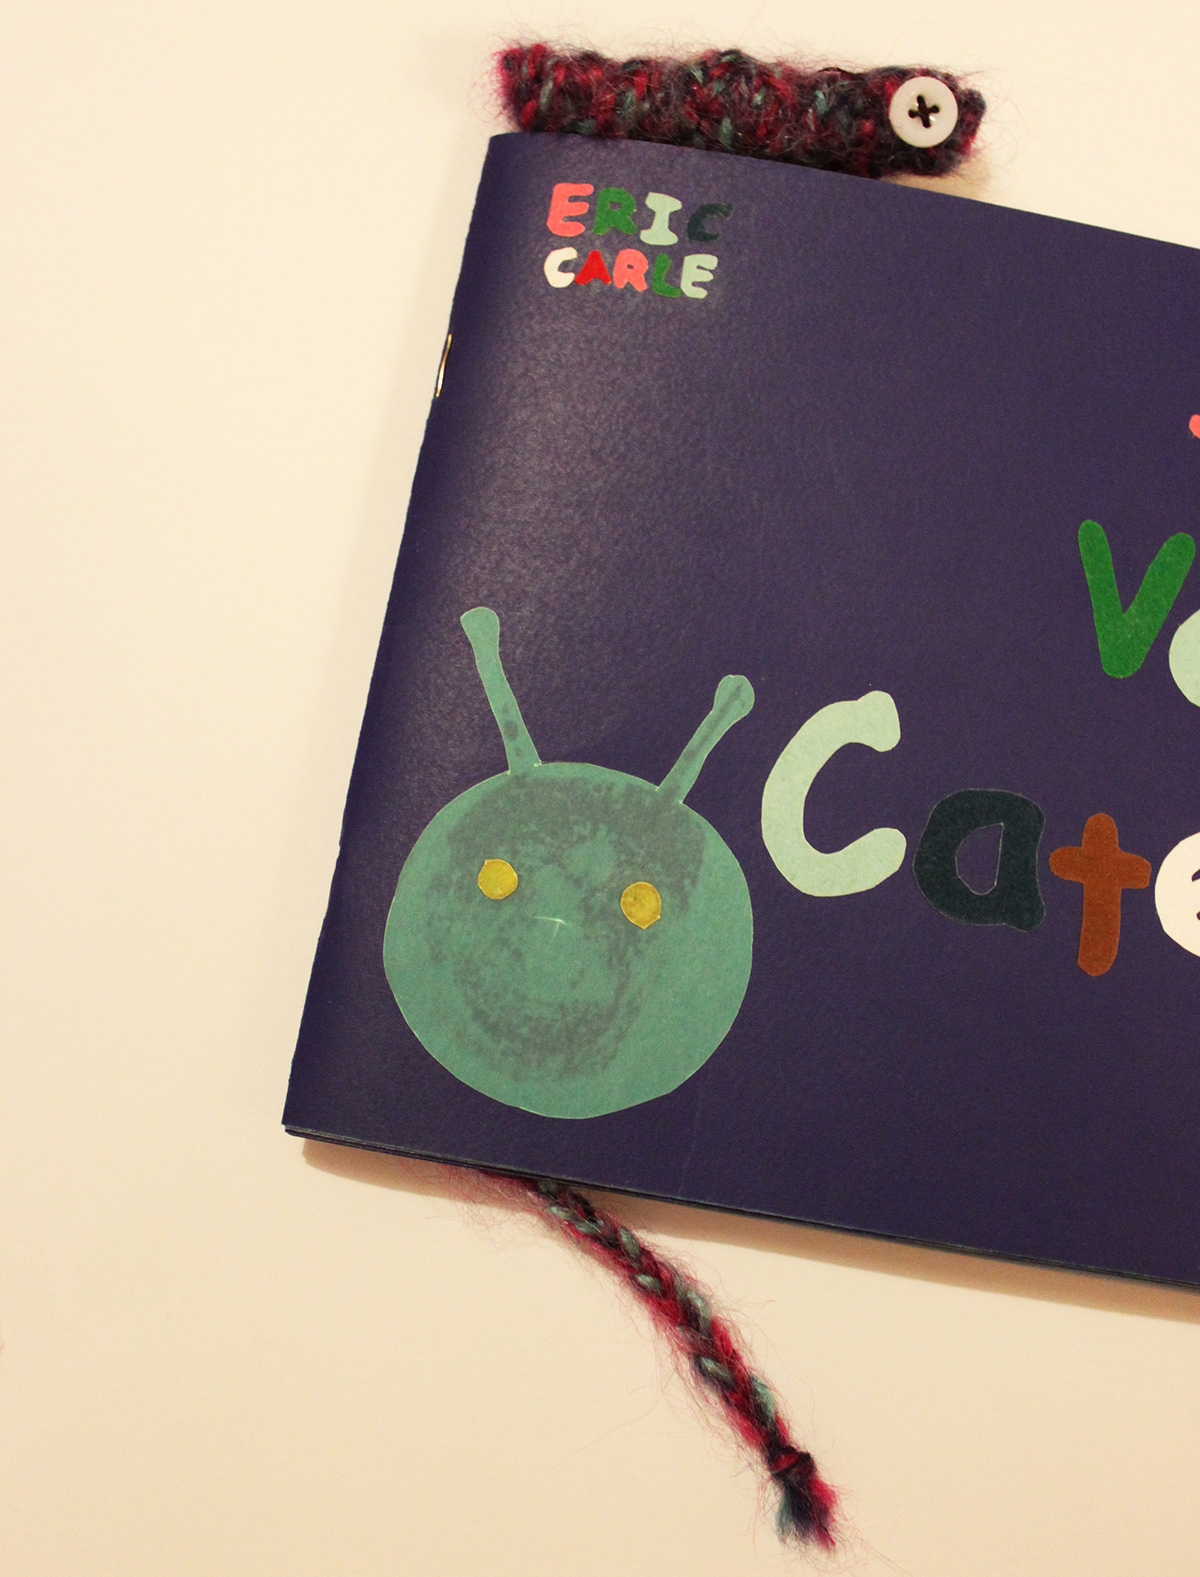 The Hungry Caterpillar Caterpillar book illustration collage